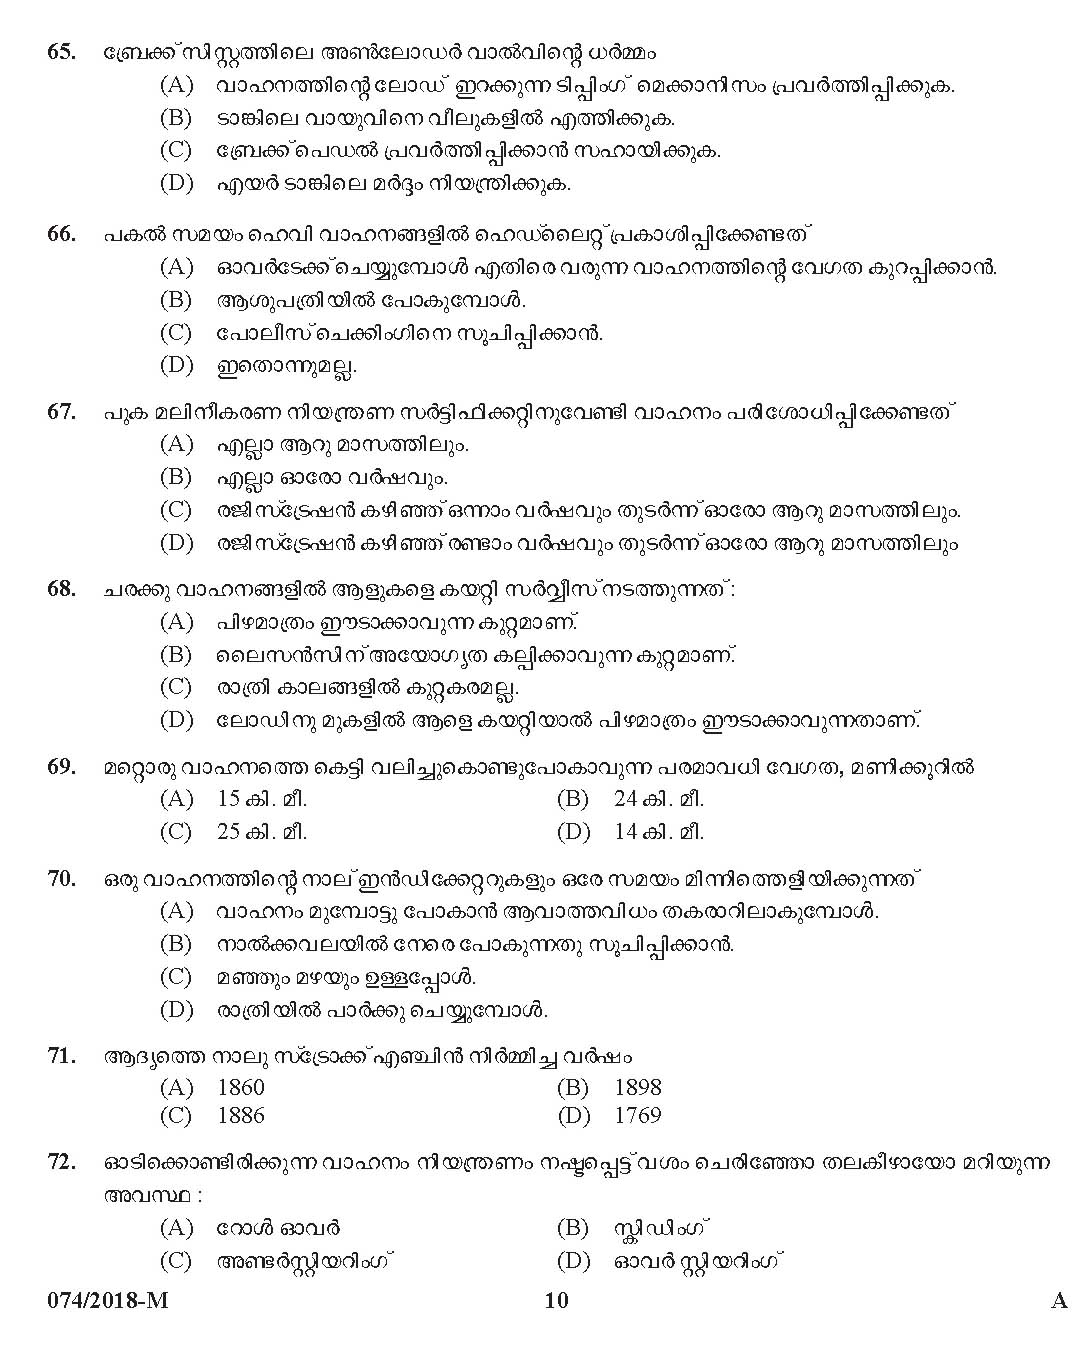 Kerala PSC Police Constable Driver Exam 2018 Question Paper Code 0742018 M 9